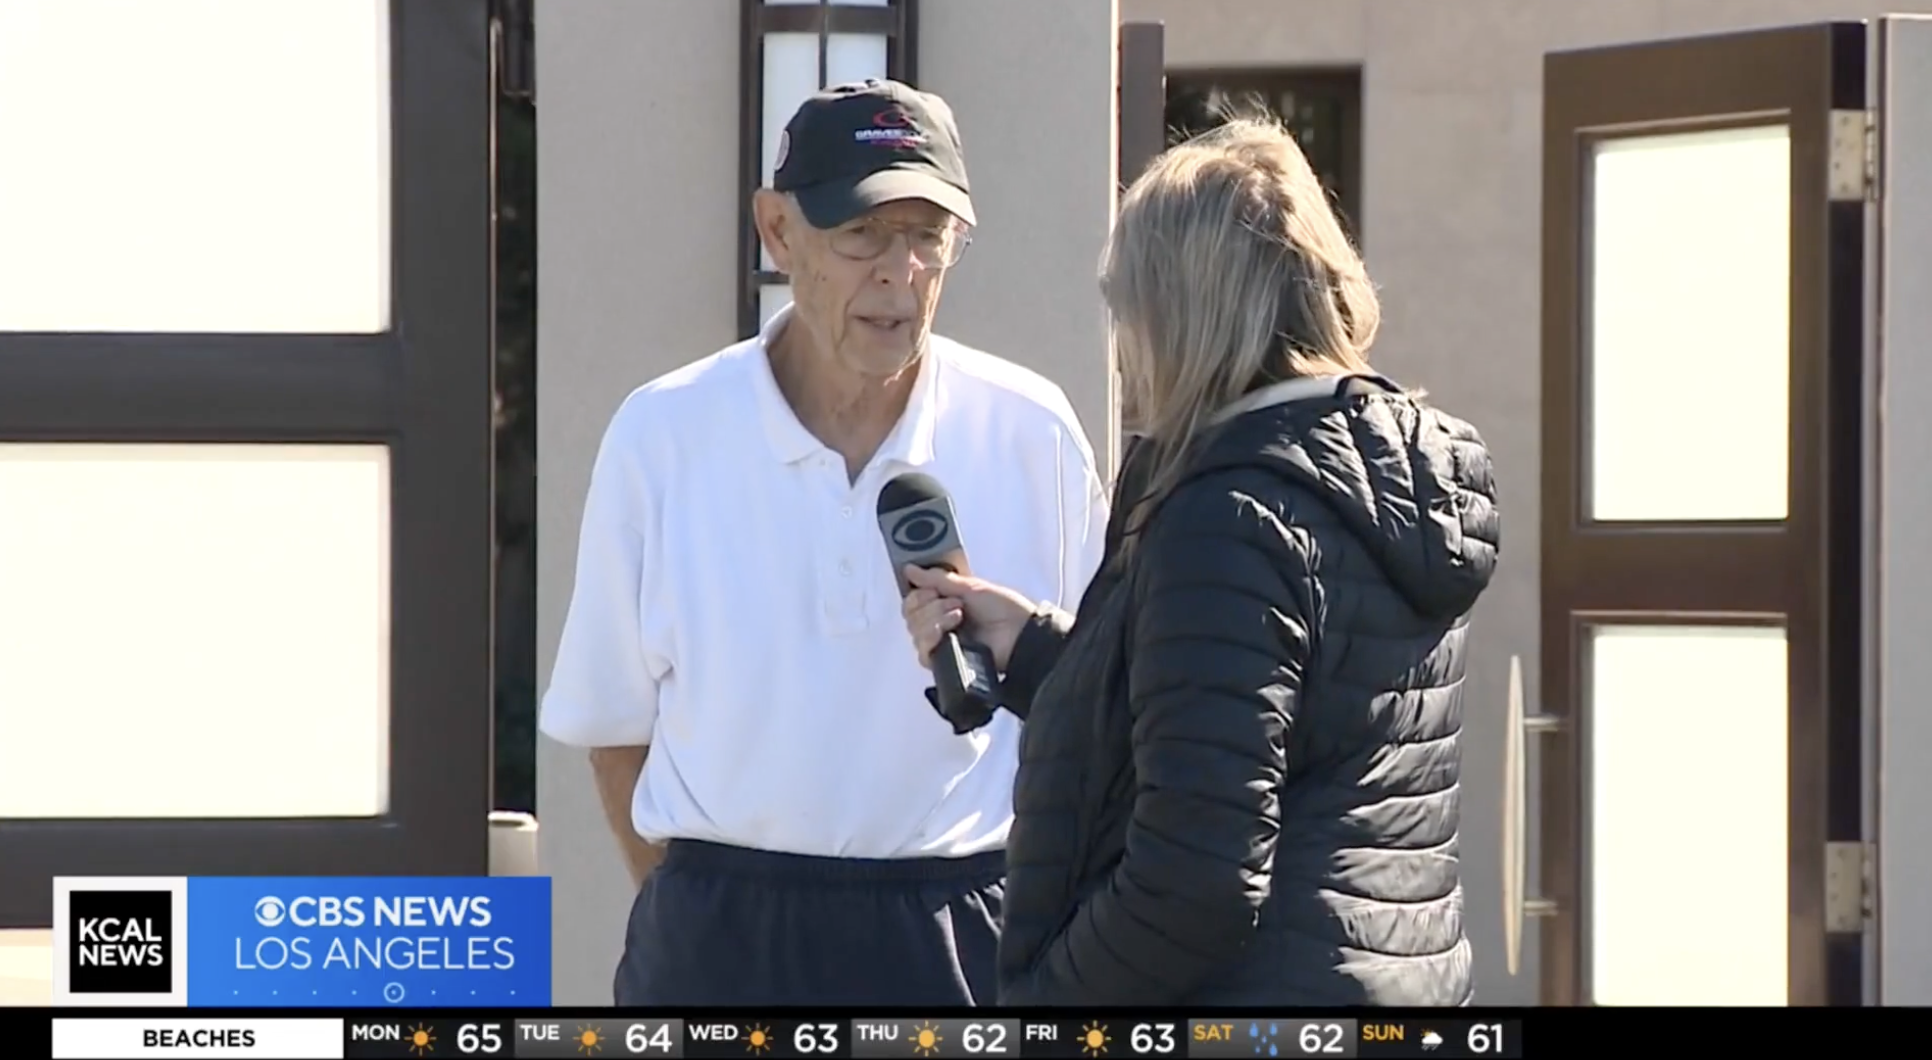 Elderly man being interviewed by a reporter outdoors, both holding a mic, with KCAL News logo on screen